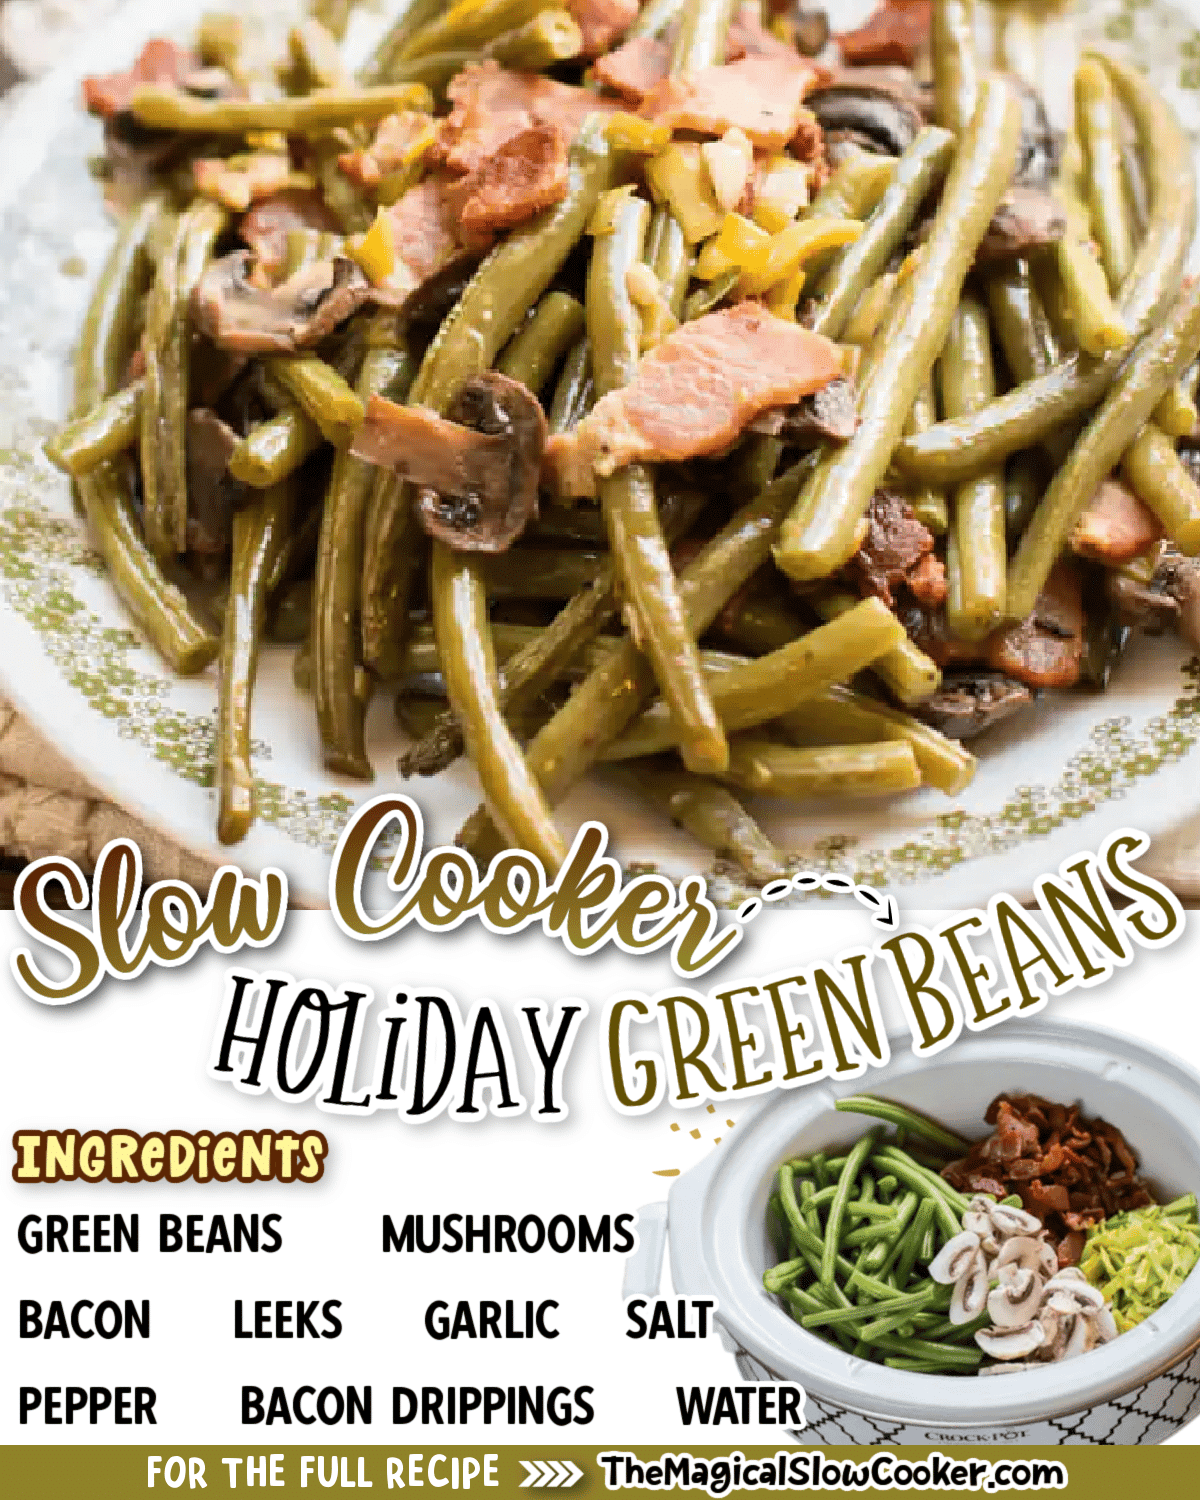 Slow Cooker Holiday Green Beans - The Magical Slow Cooker